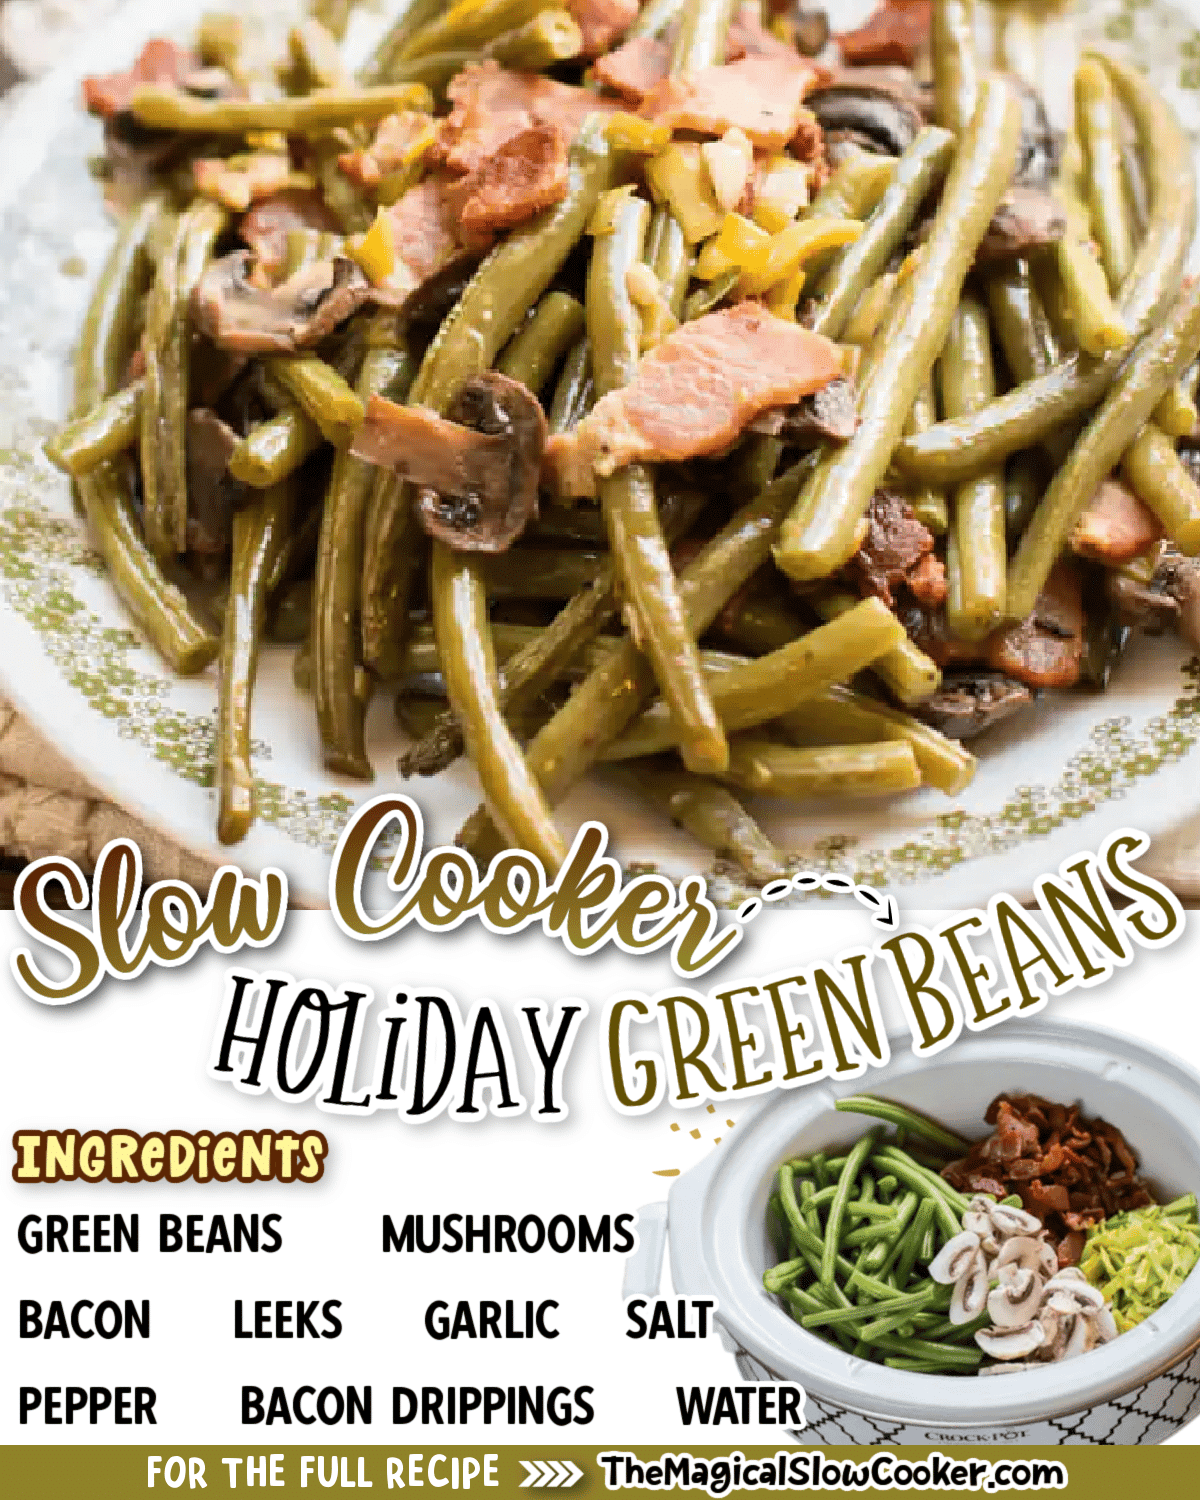 Slow Cooker Holiday Green Beans - The Magical Slow Cooker